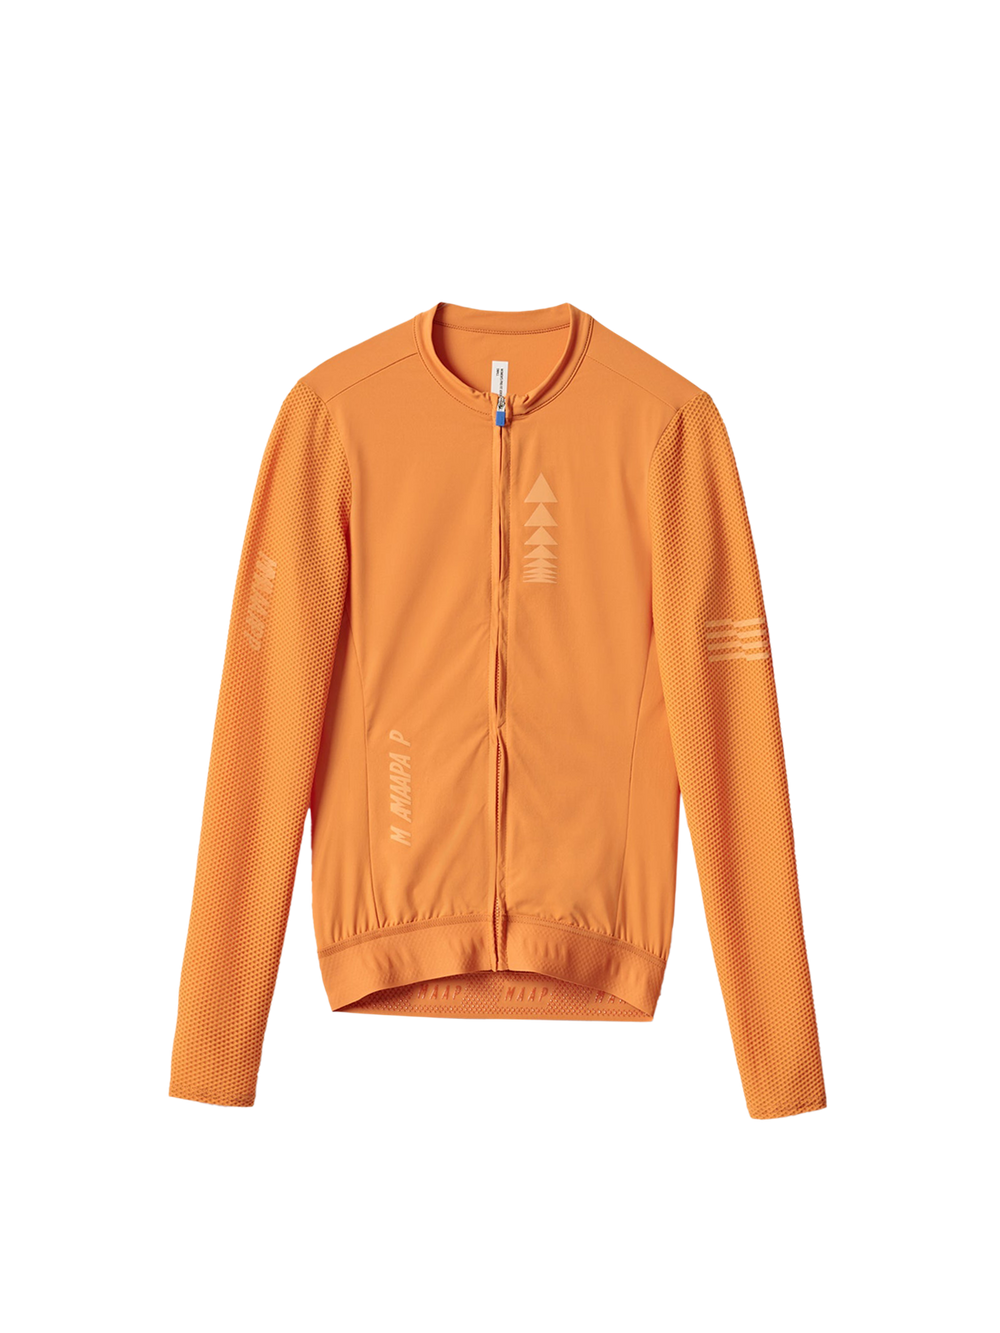 Product Image for Women's Shift Pro Base LS Jersey